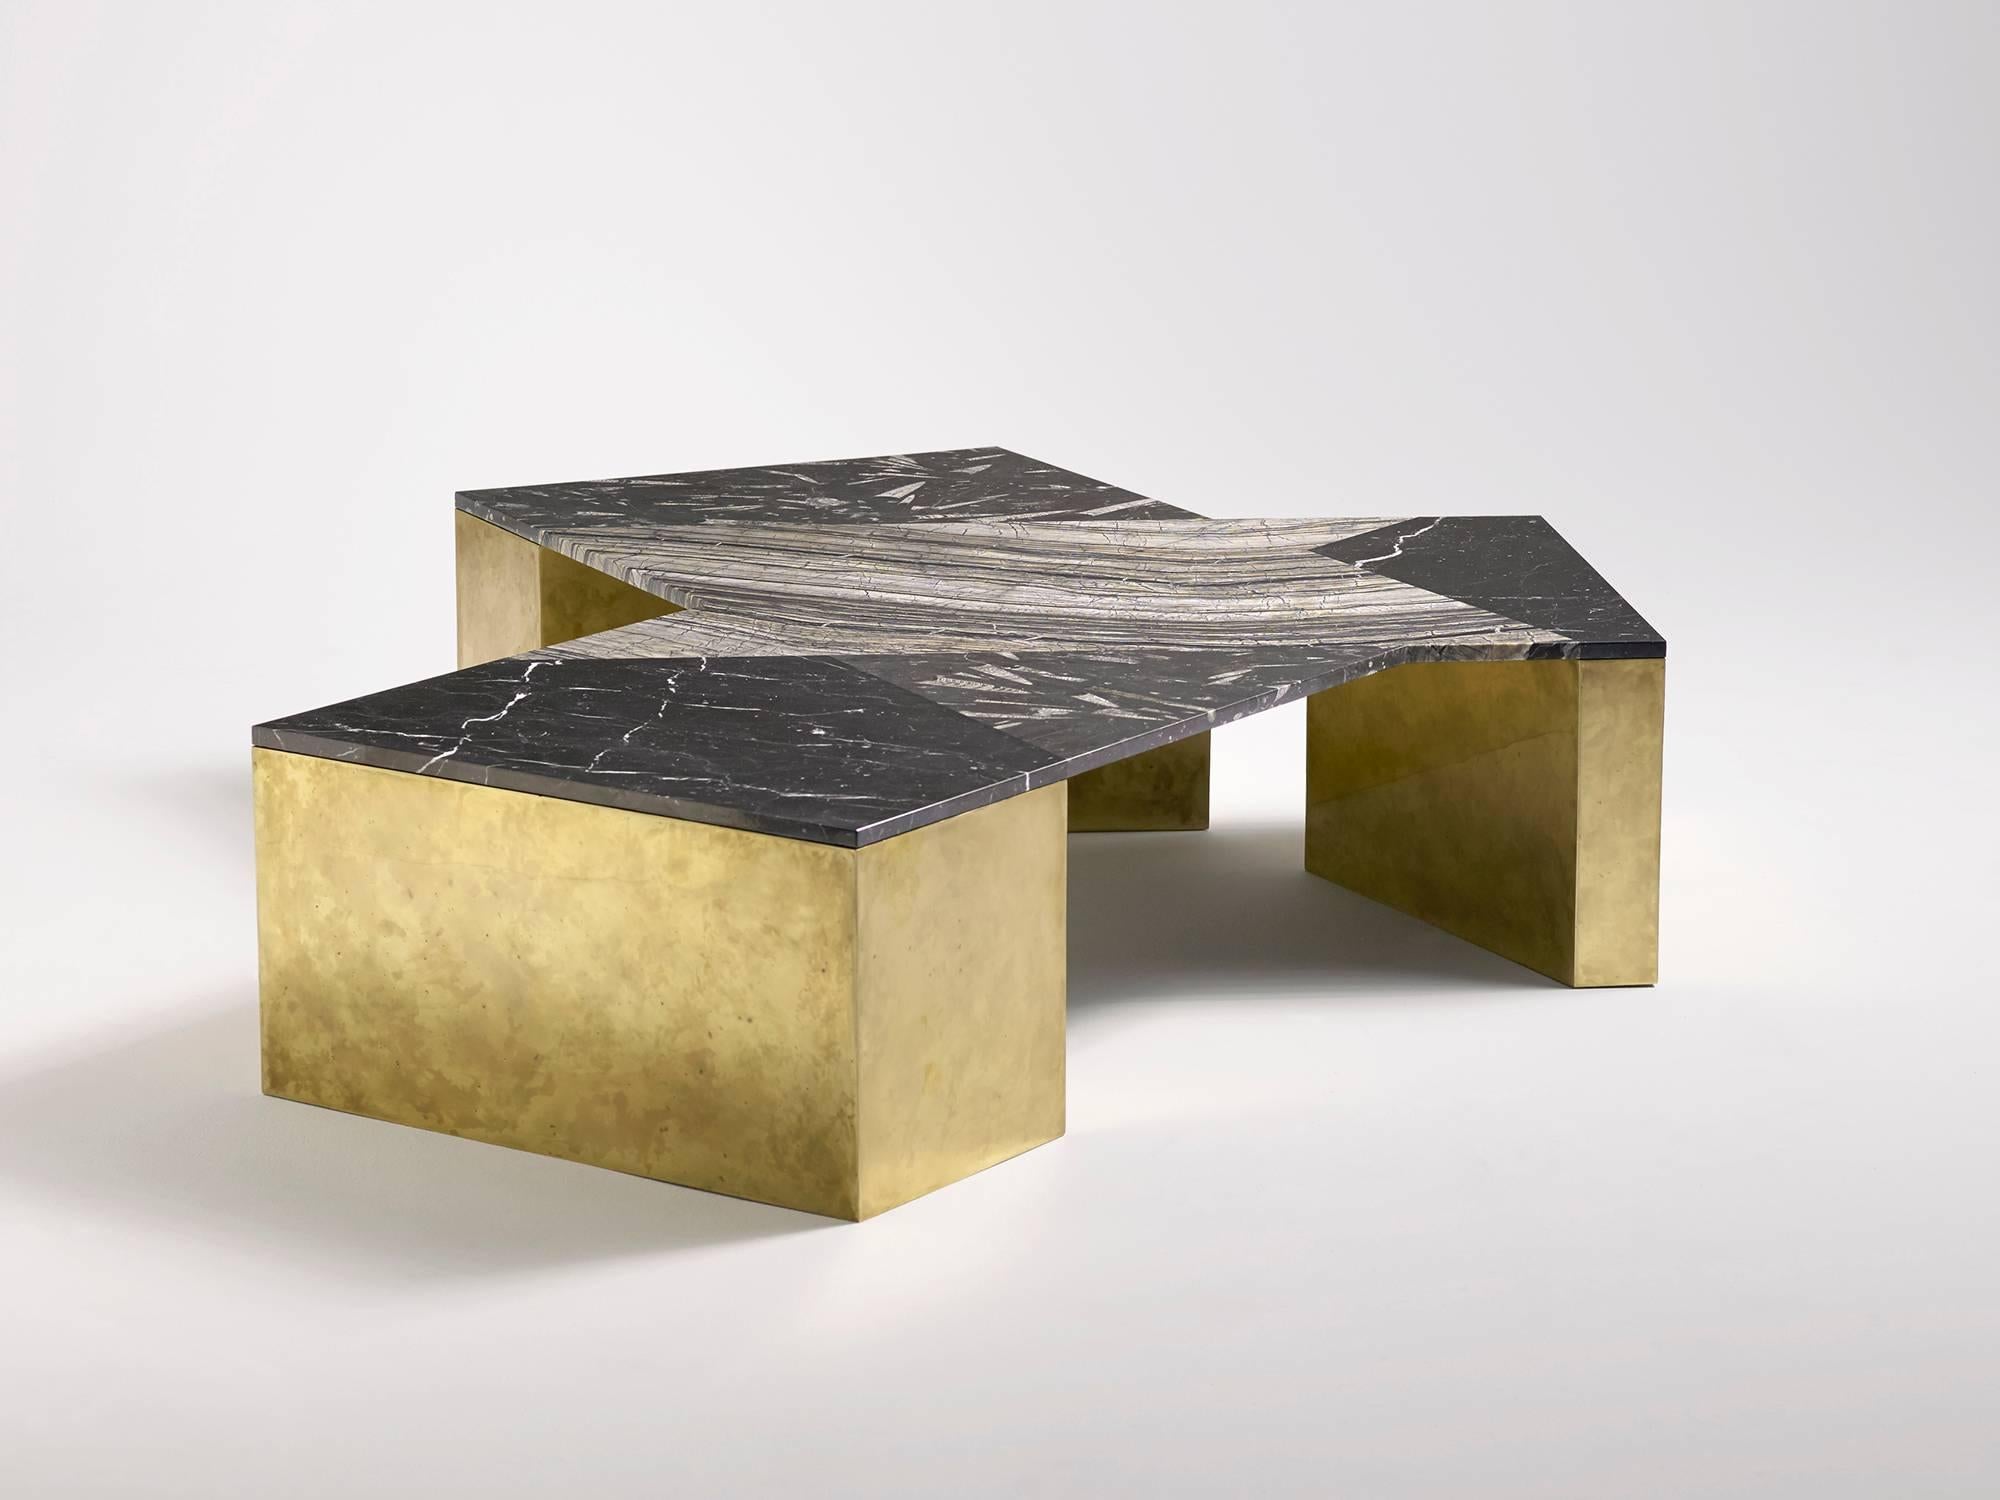 Geometric coffee table in mixed marble, brass, steel and wood by LA-based designer Brian Thoreen. This black version is an open edition. The green version is an edition of 8 + 2 AP that was designed exclusively for Design Miami, 2015.